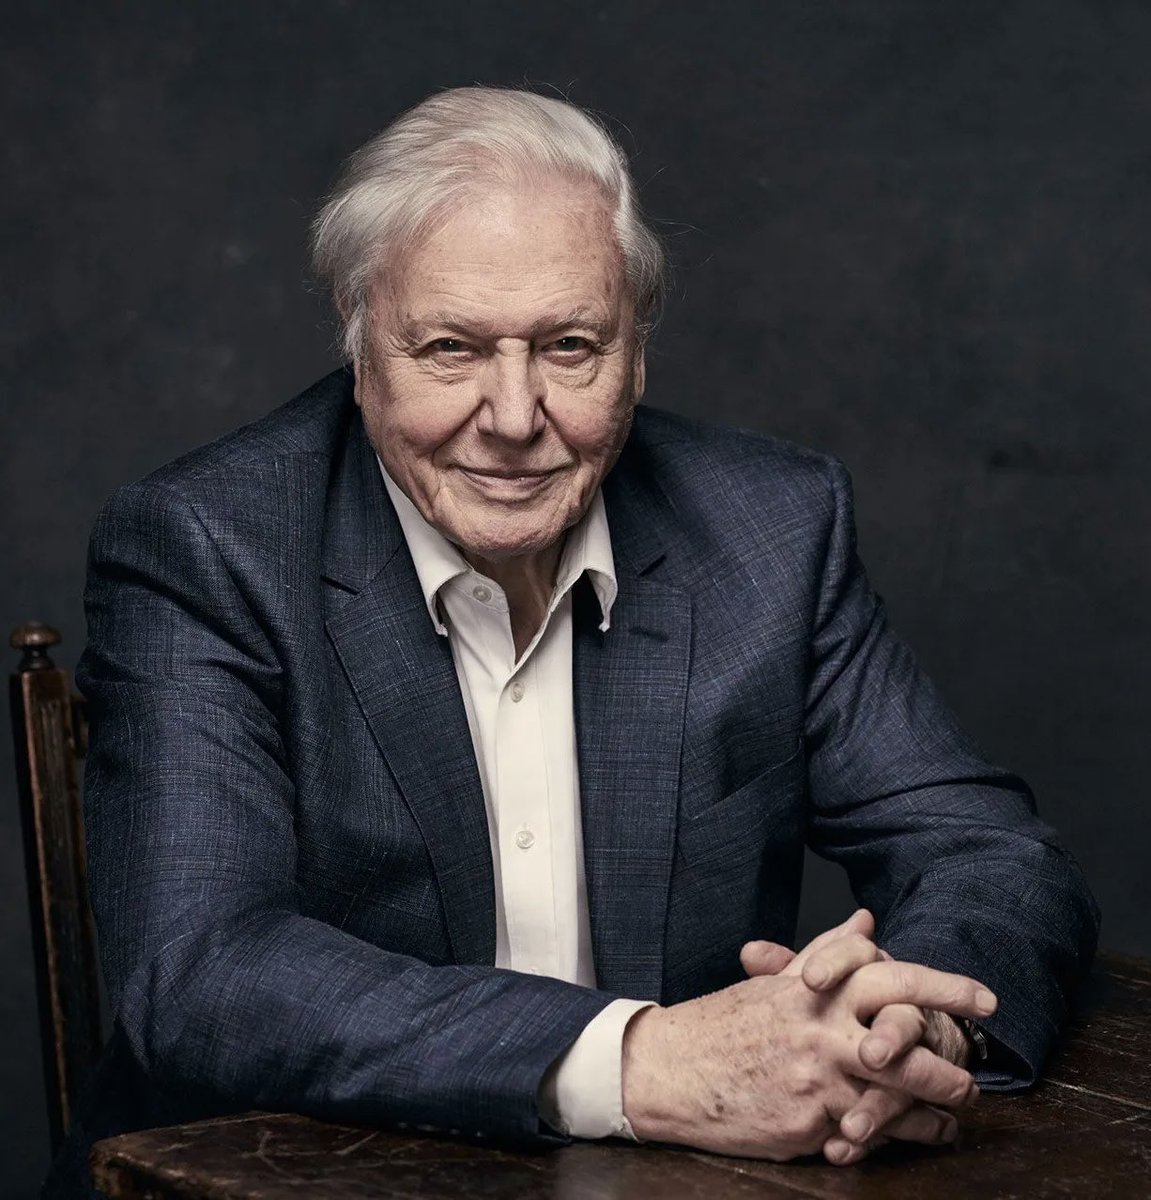 Happy 98th birthday to the legendary Sir David Attenborough. 

As someone who loves his nature documentaries, they are an important part in my love of animals as a person.

Thank you for inspiring me to love wildlife, and may god bless you for inspiring animal lovers to this day.